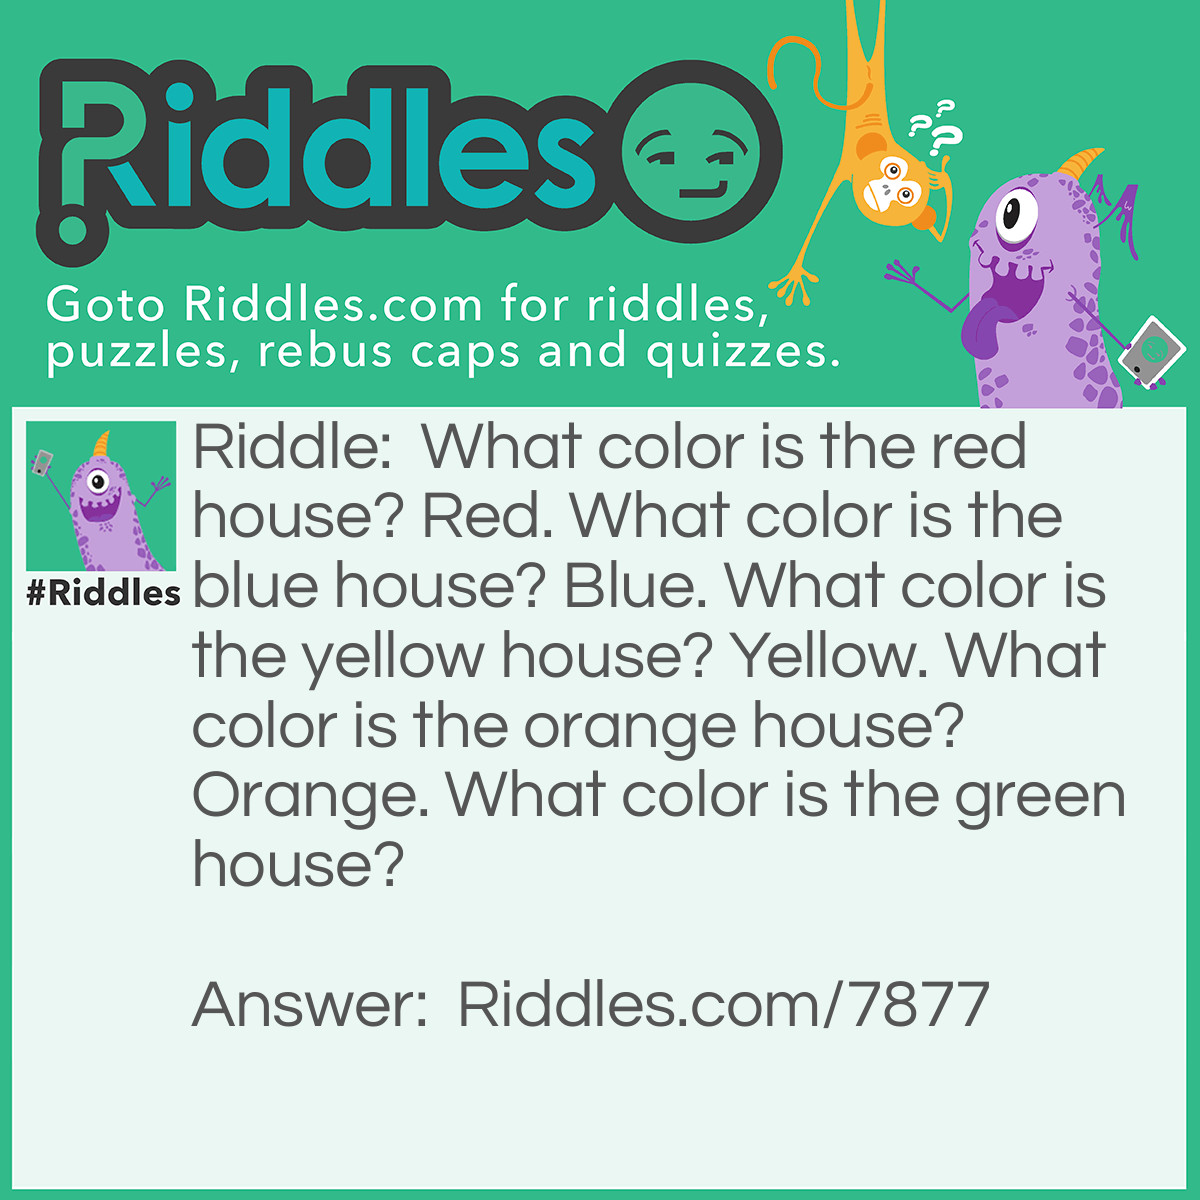 Riddle: What color is the red house? Red. What color is the blue house? Blue. What color is the yellow house? Yellow. What color is the orange house? Orange. What color is the green house? Answer: Clear! It's a greenhouse!